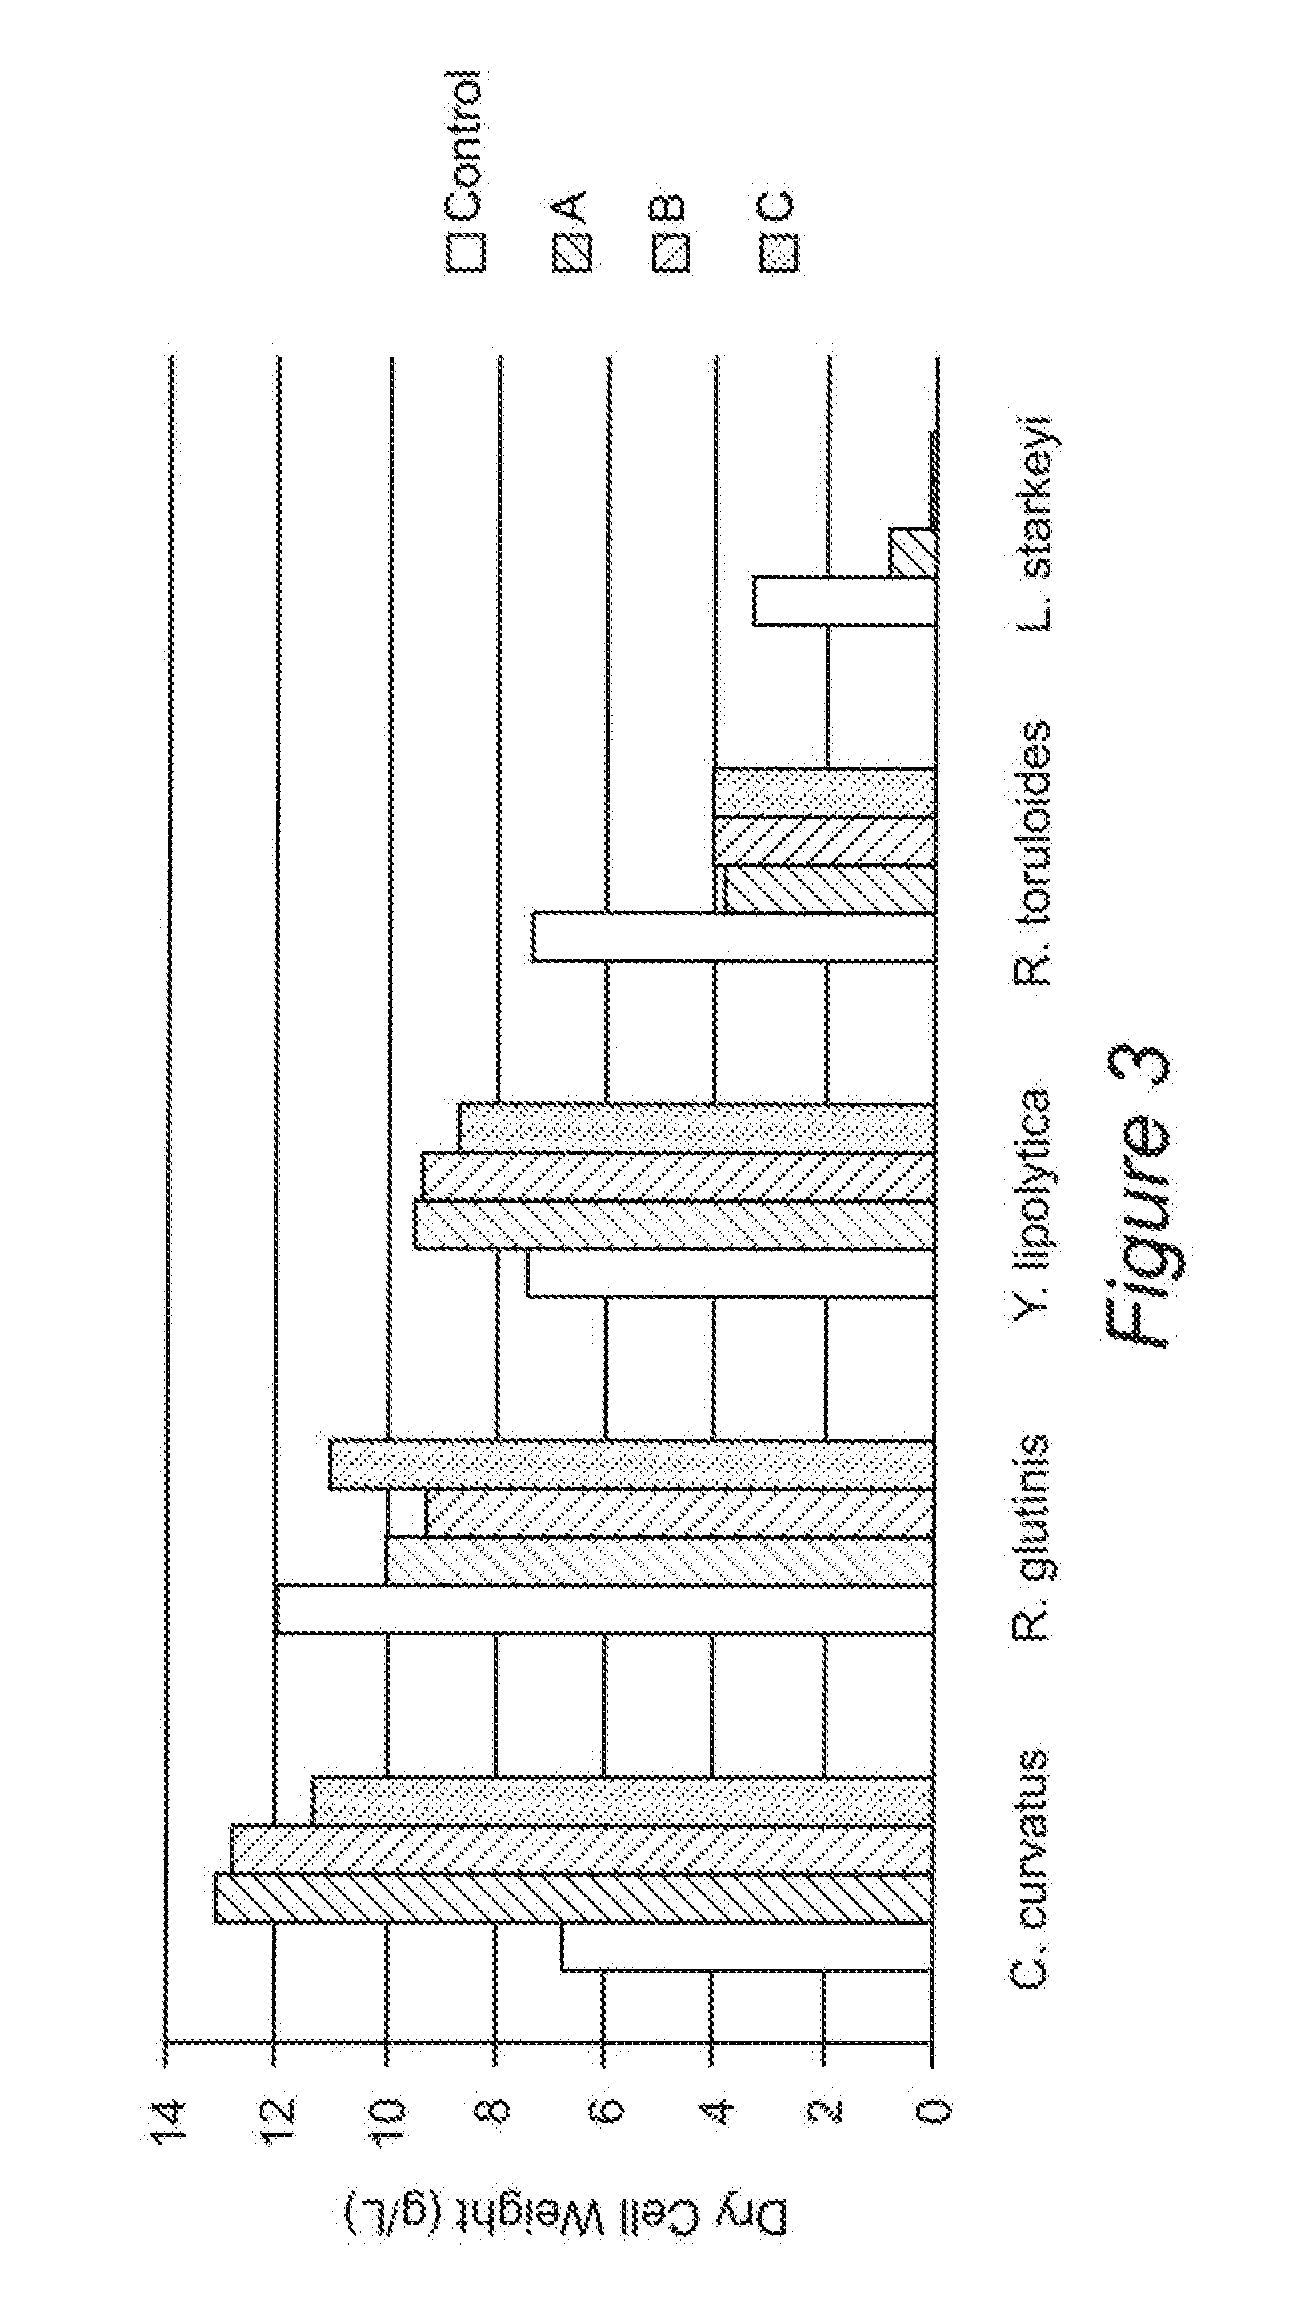 Integrated system for production of biofuel feedstock